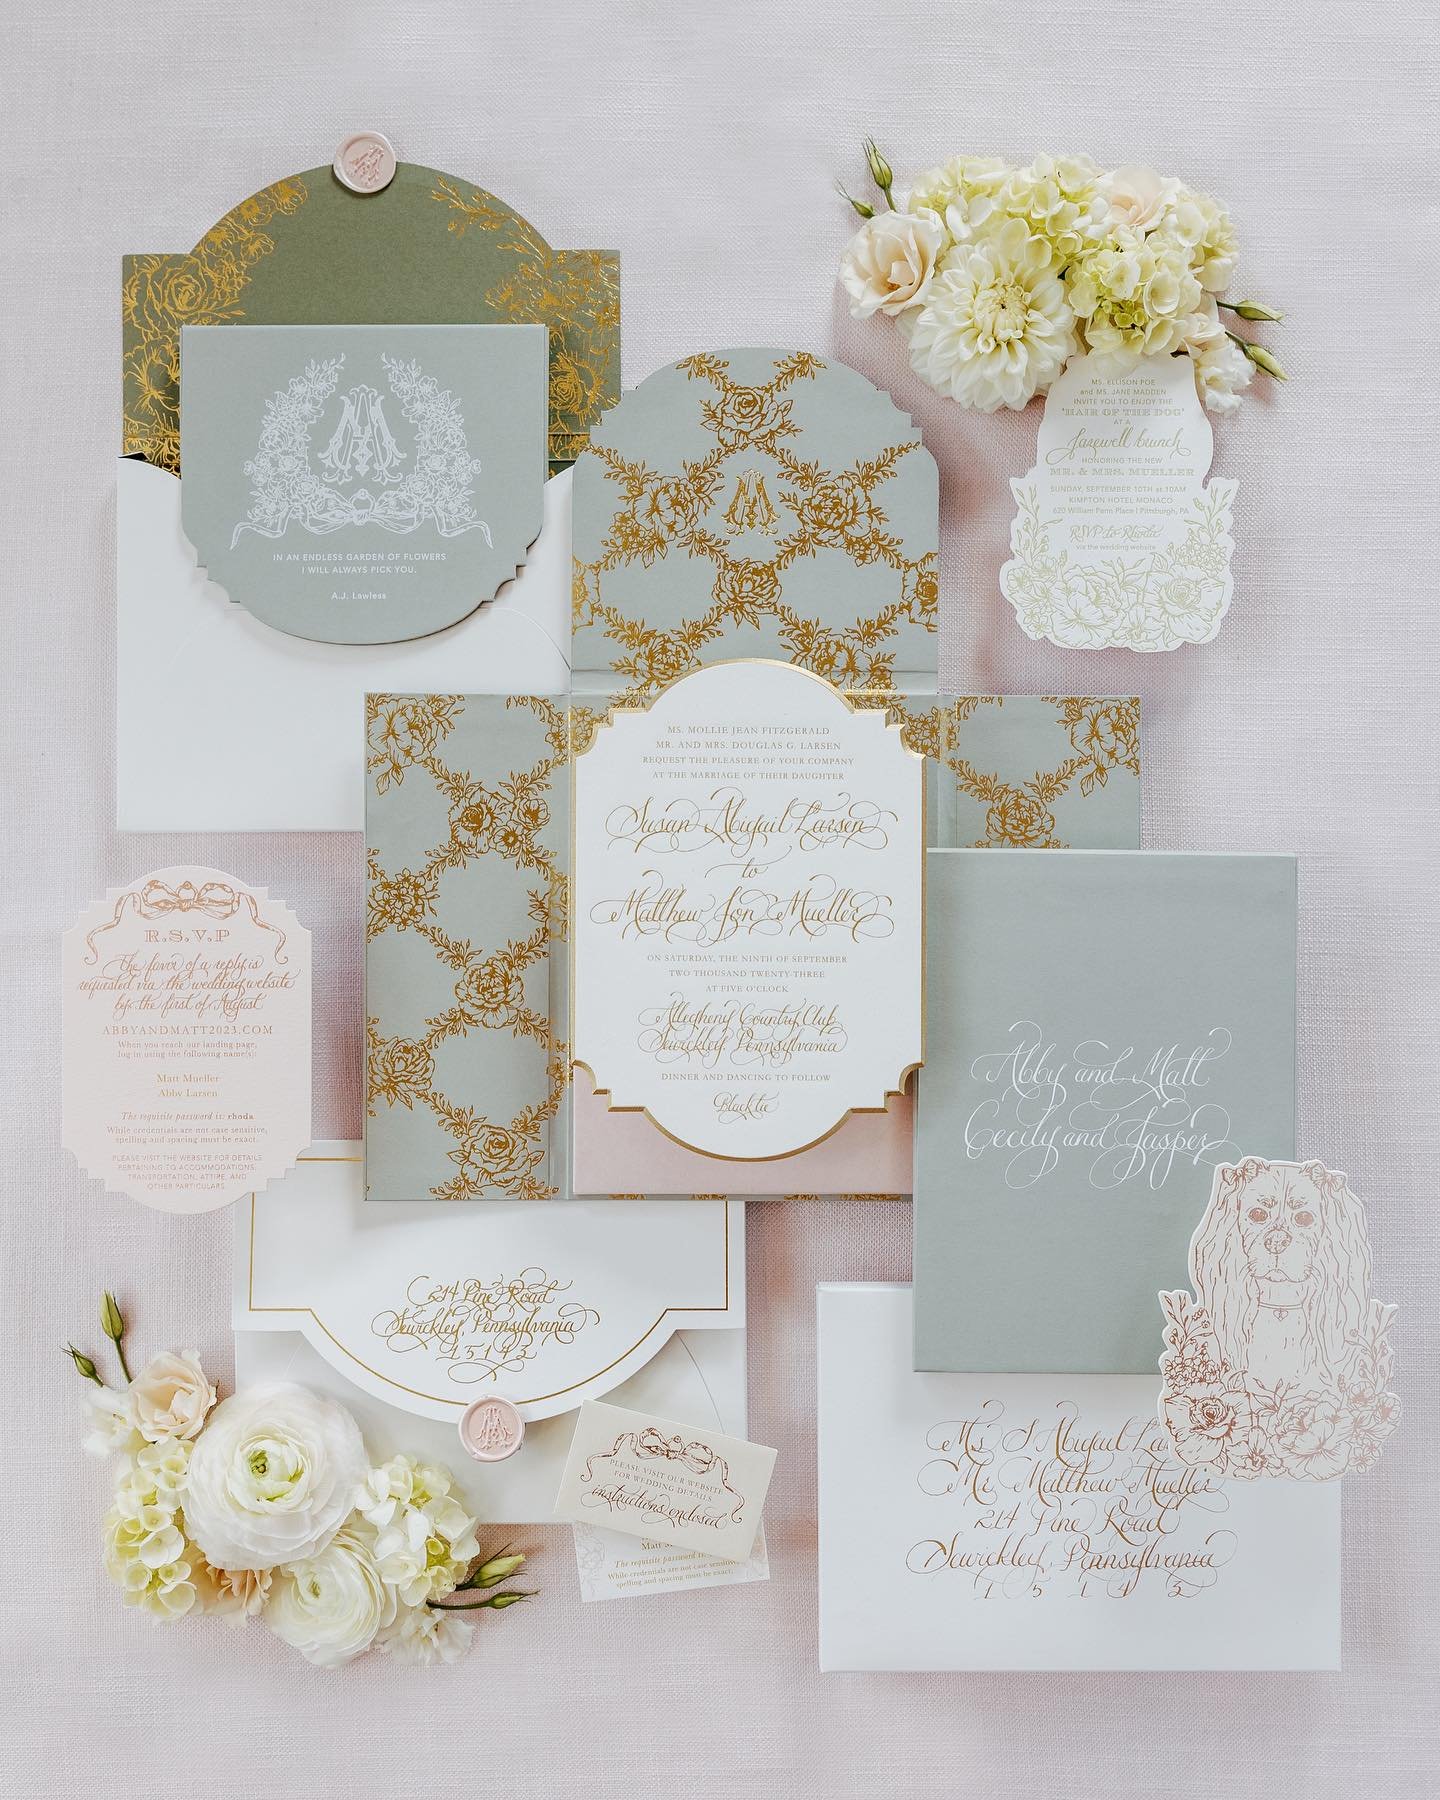 &ldquo;In and endless garden of flowers, I will always pick you.&rdquo; -A.J. Lawless

We are swooning over Abby and Matt&rsquo;s invitation suite that features a handcrafted folio with a velvet blush pocket to house all of their wedding weekend cele